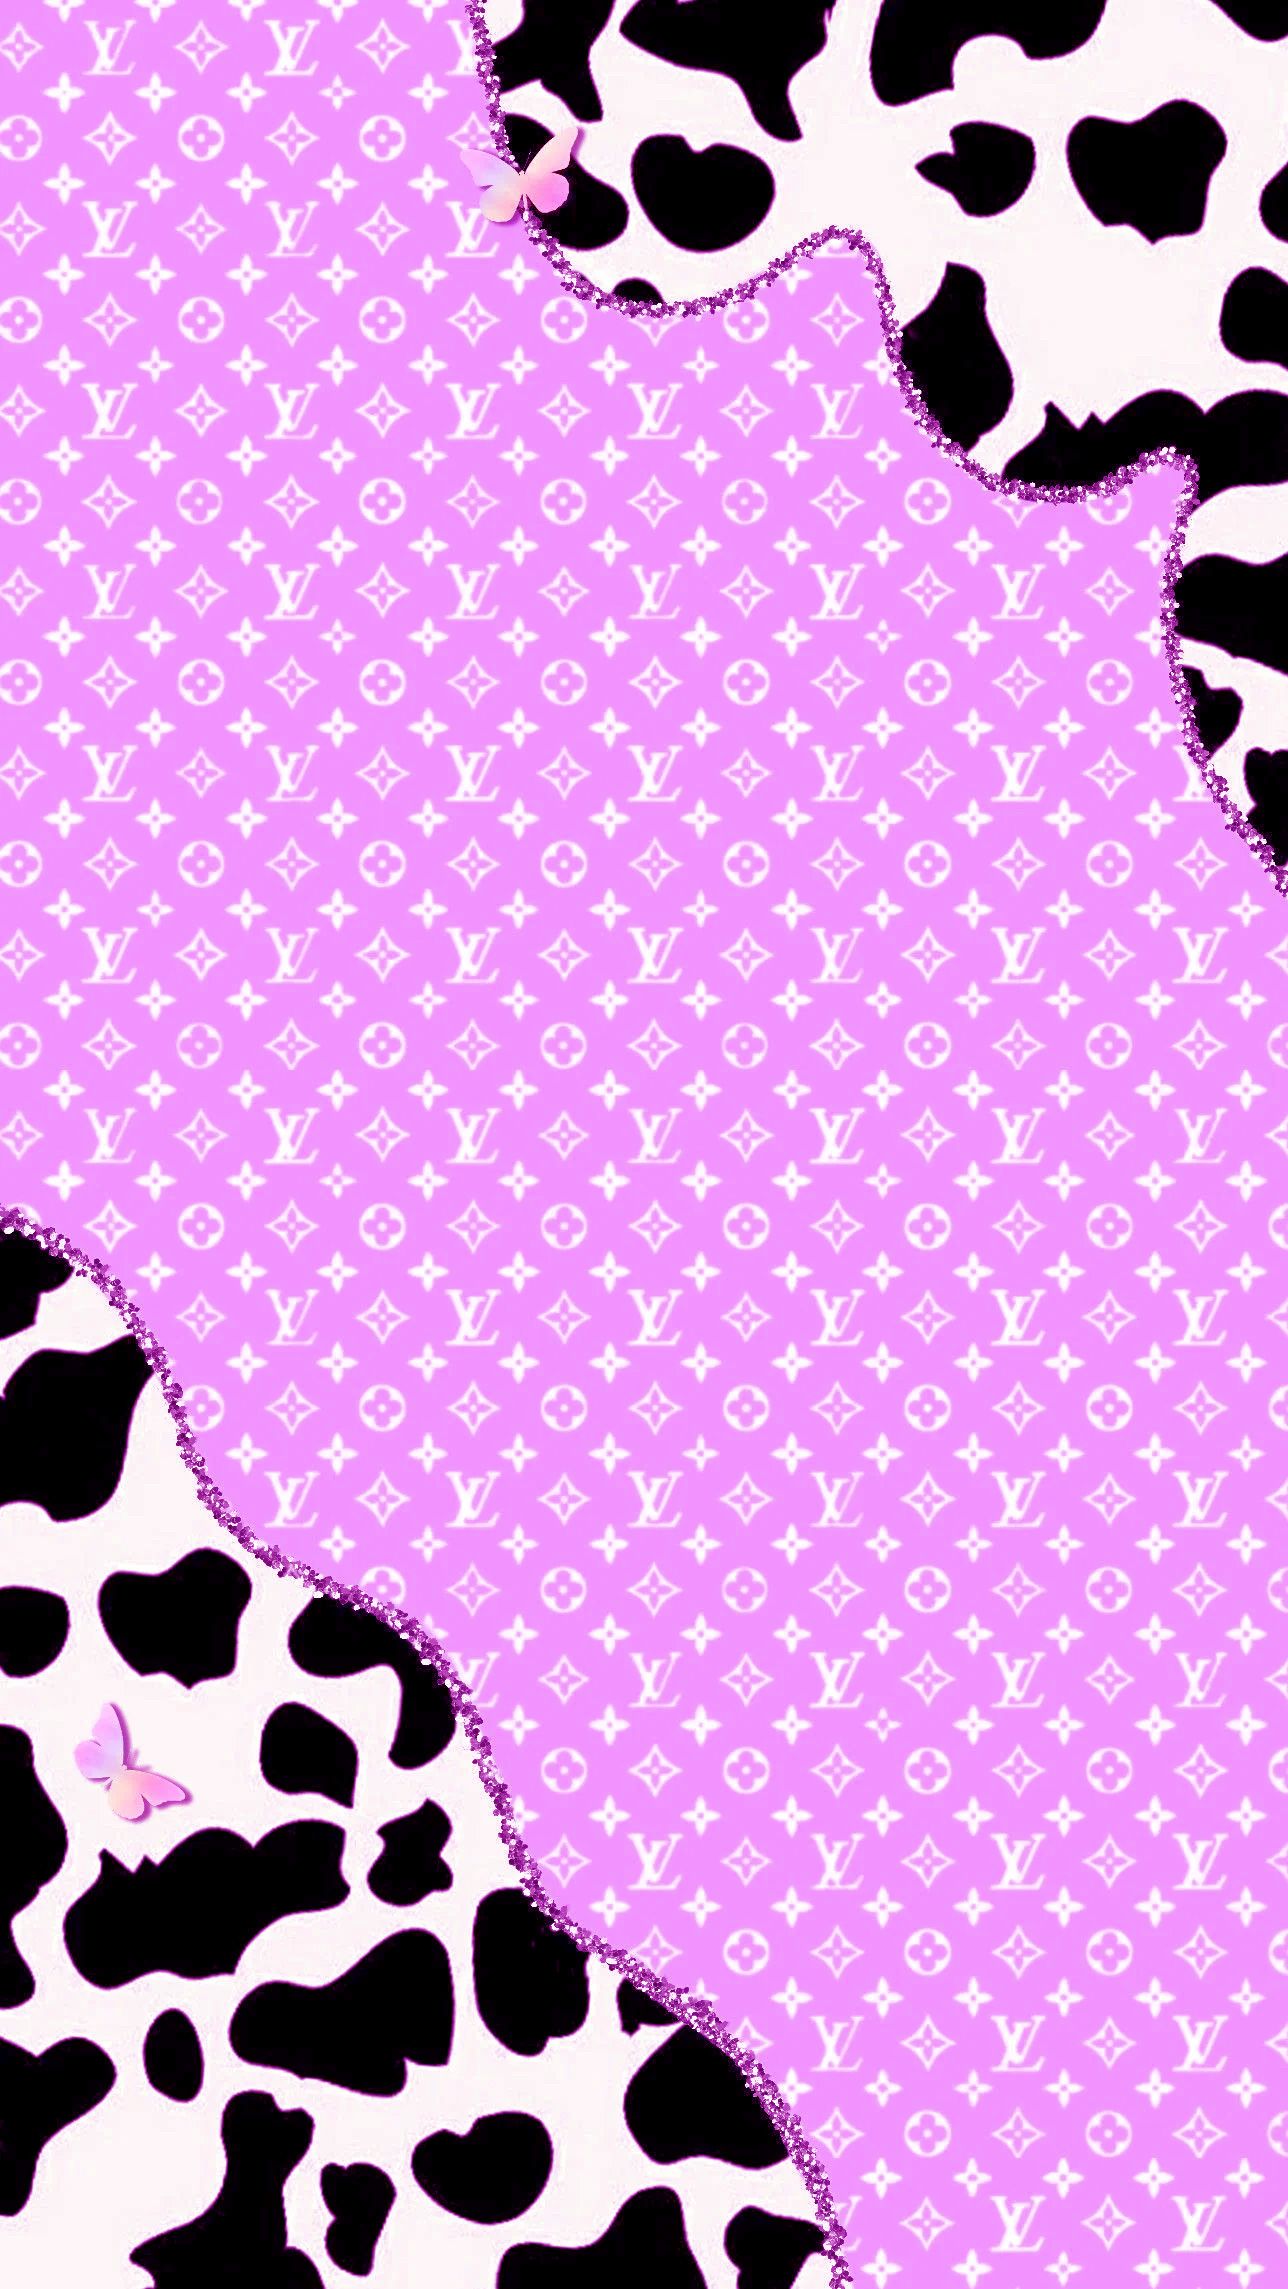 Aesthetic purple Louis Vuitton wallpaper with cow print and butterflies - Cow